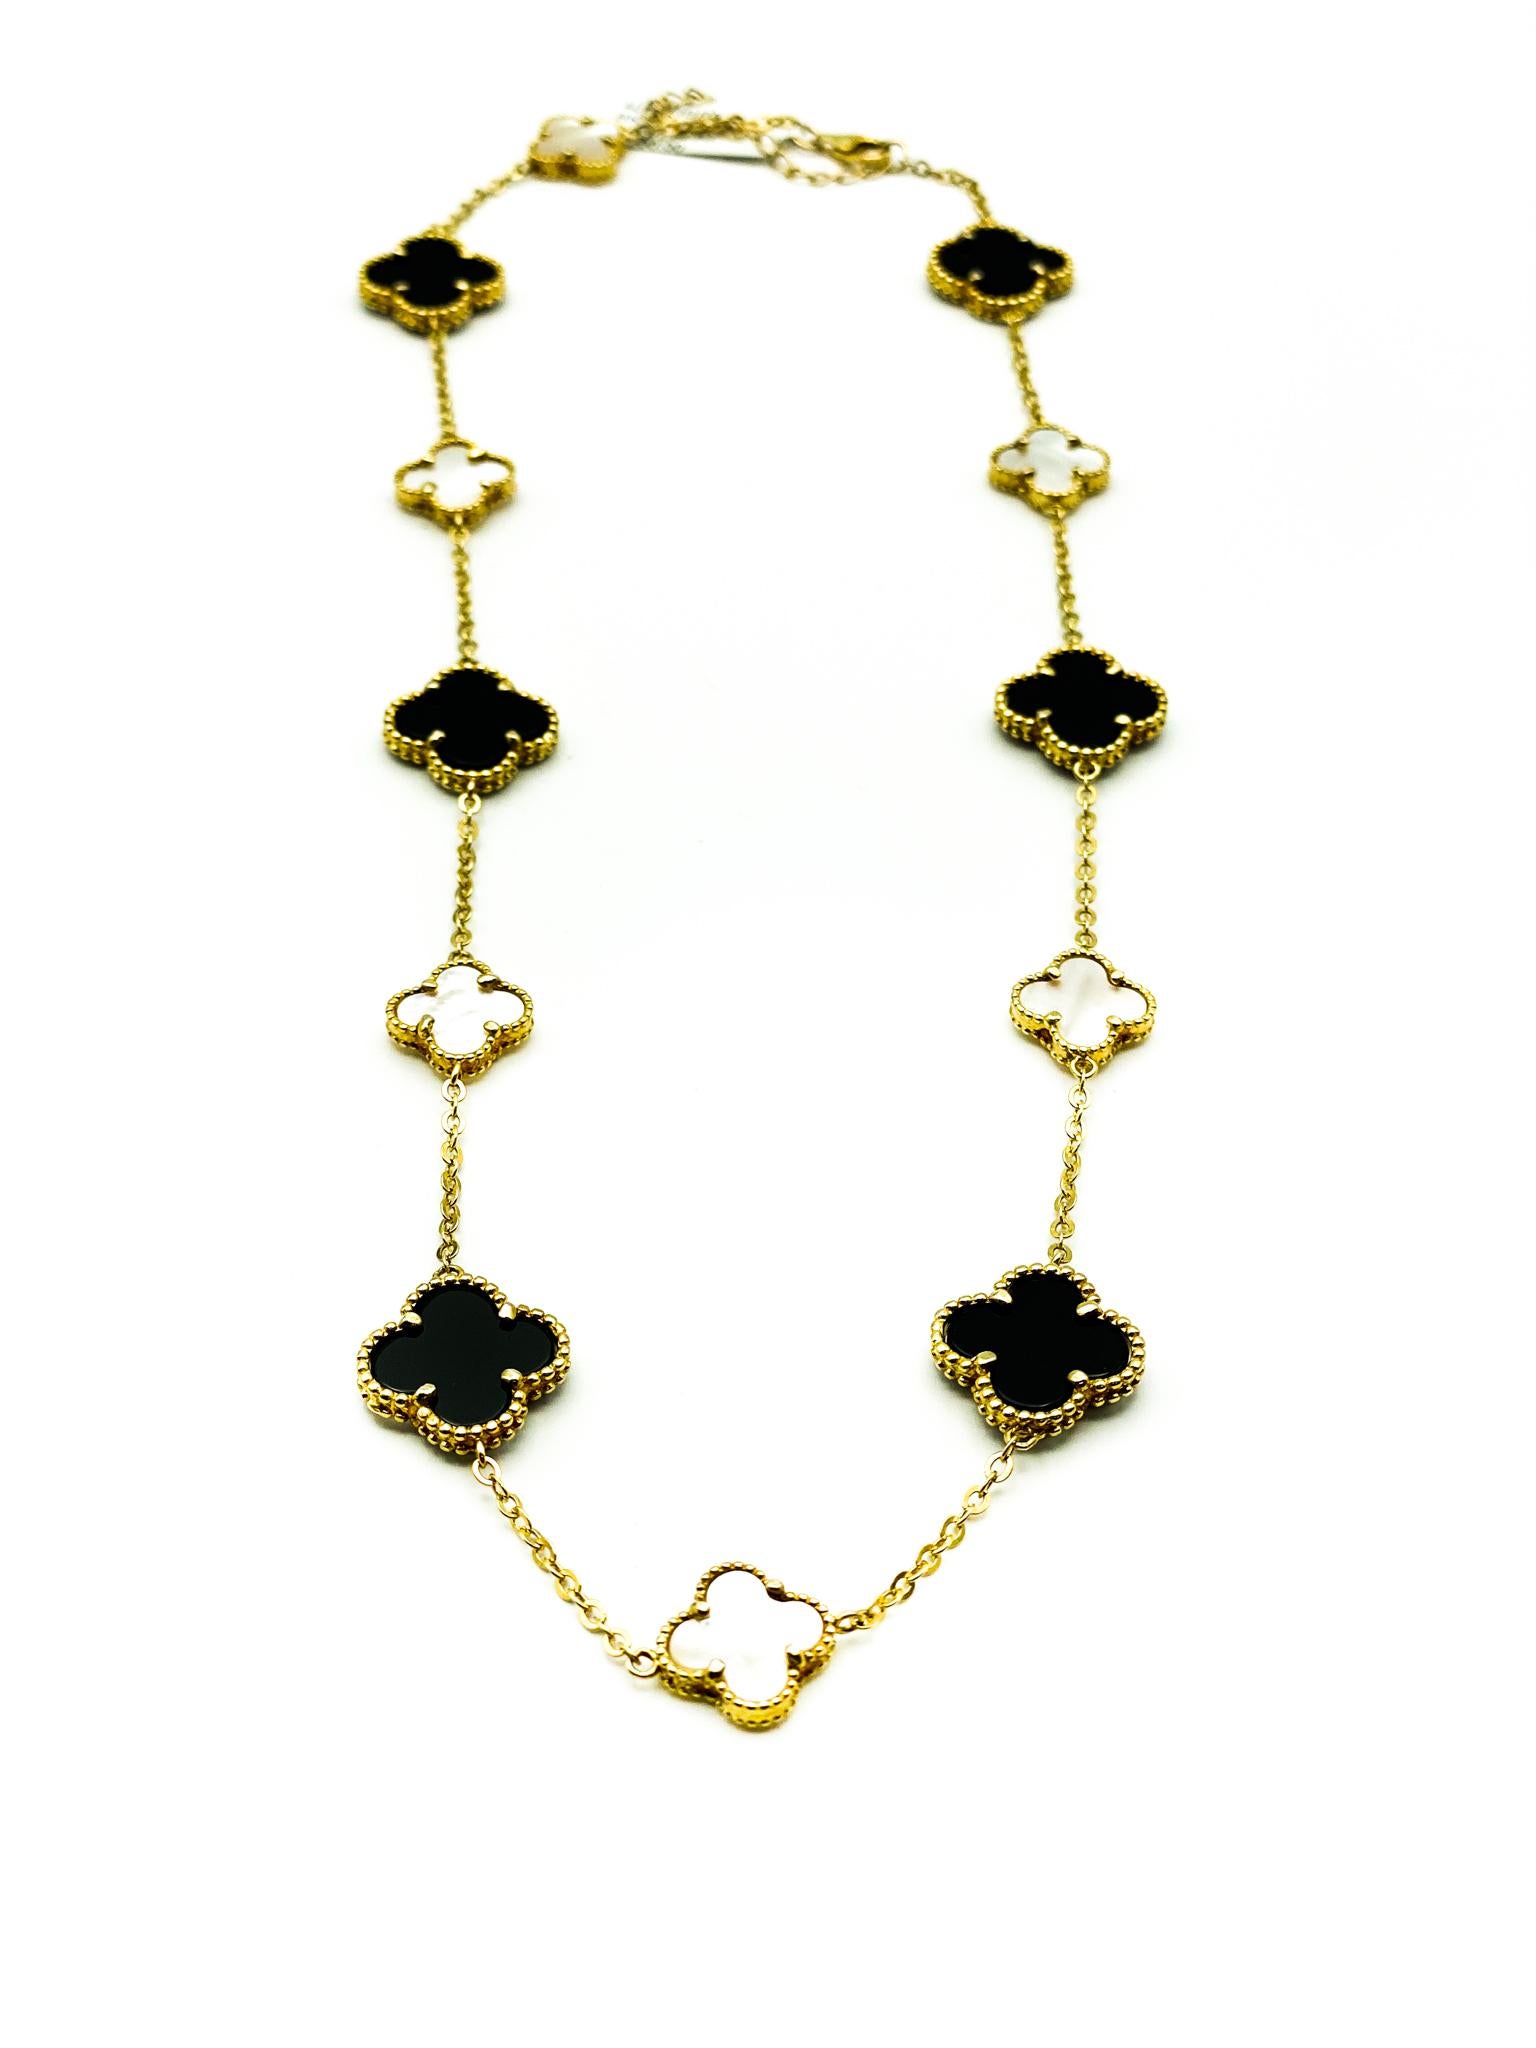 French, Alhambra Style Necklace 
18K Gold on Sterling Silver 
